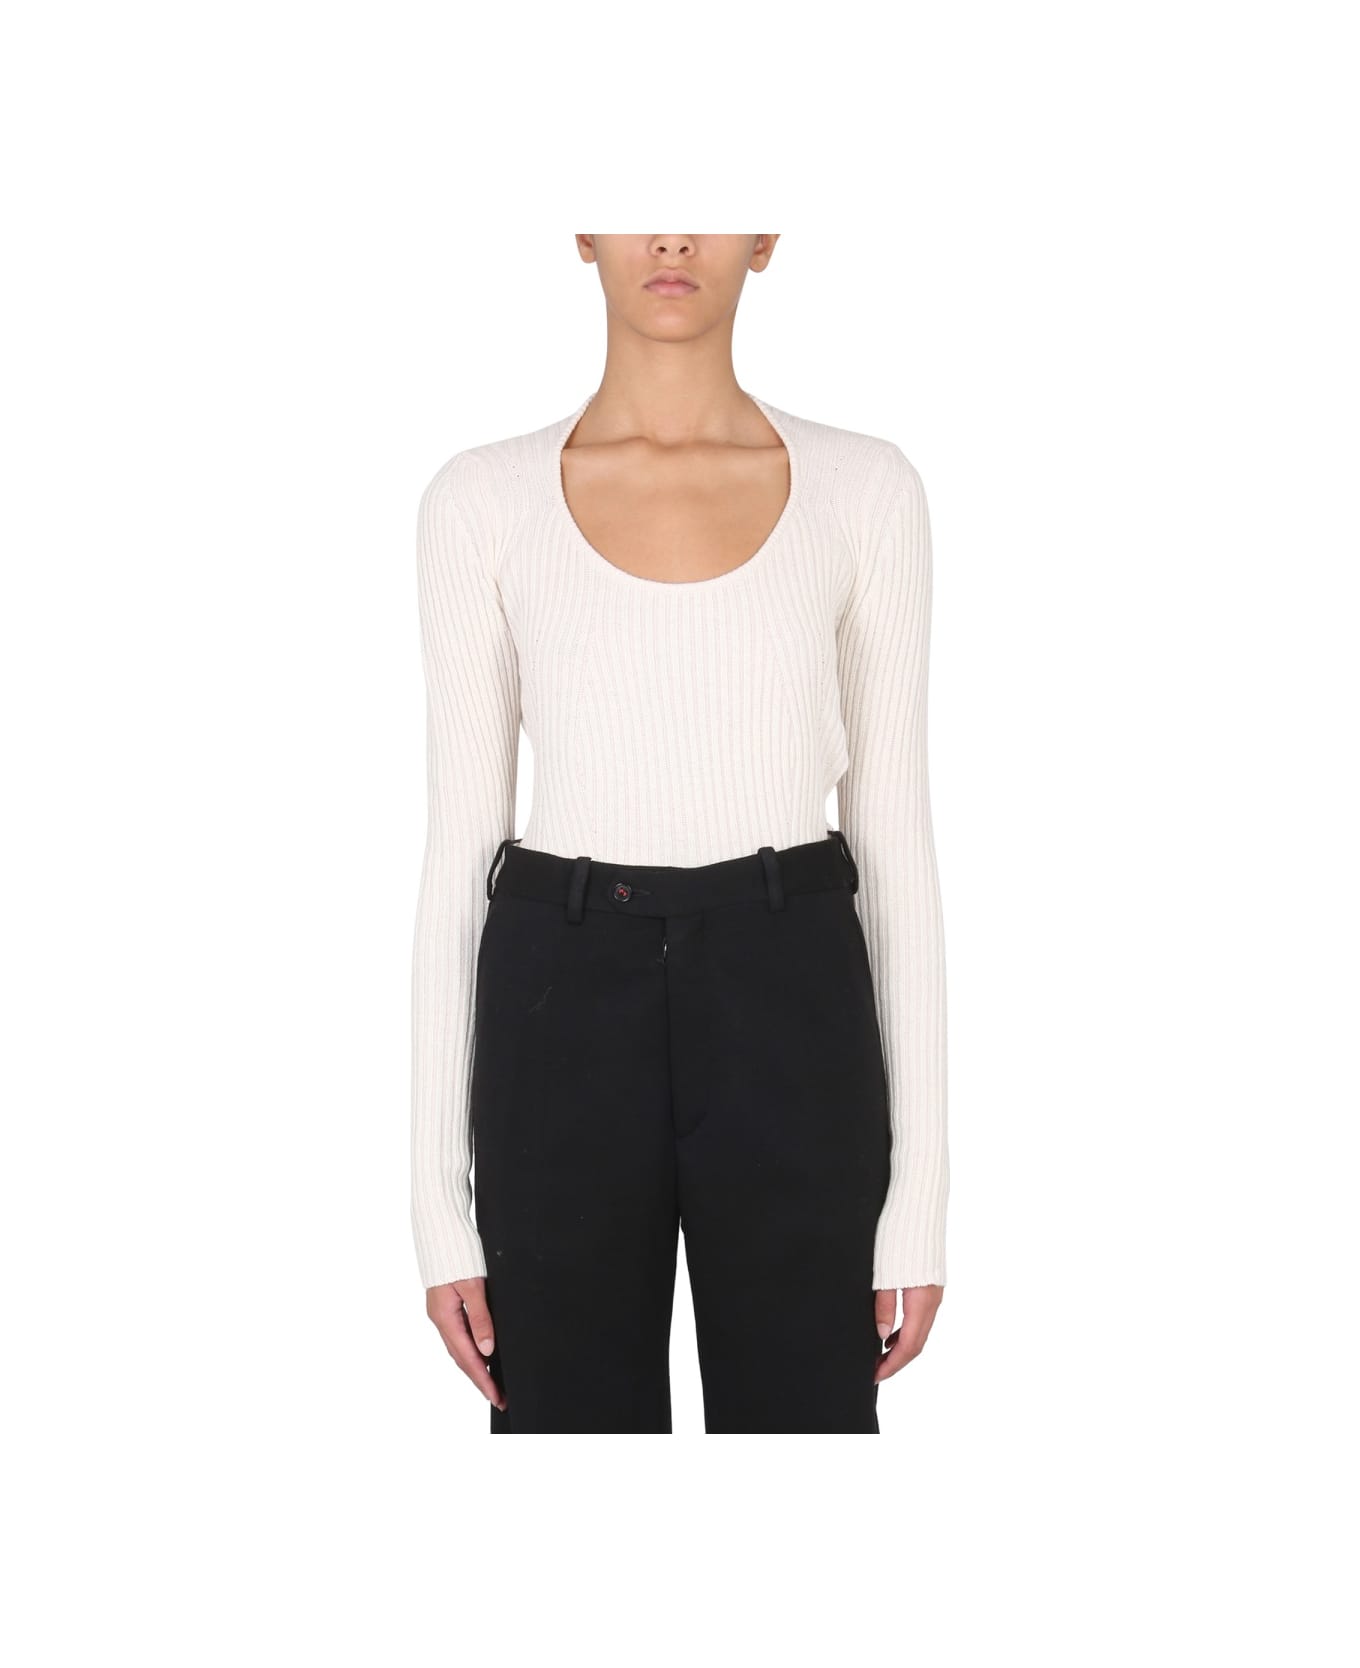 Proenza Schouler White Label Ribbed Sweater. - WHITE